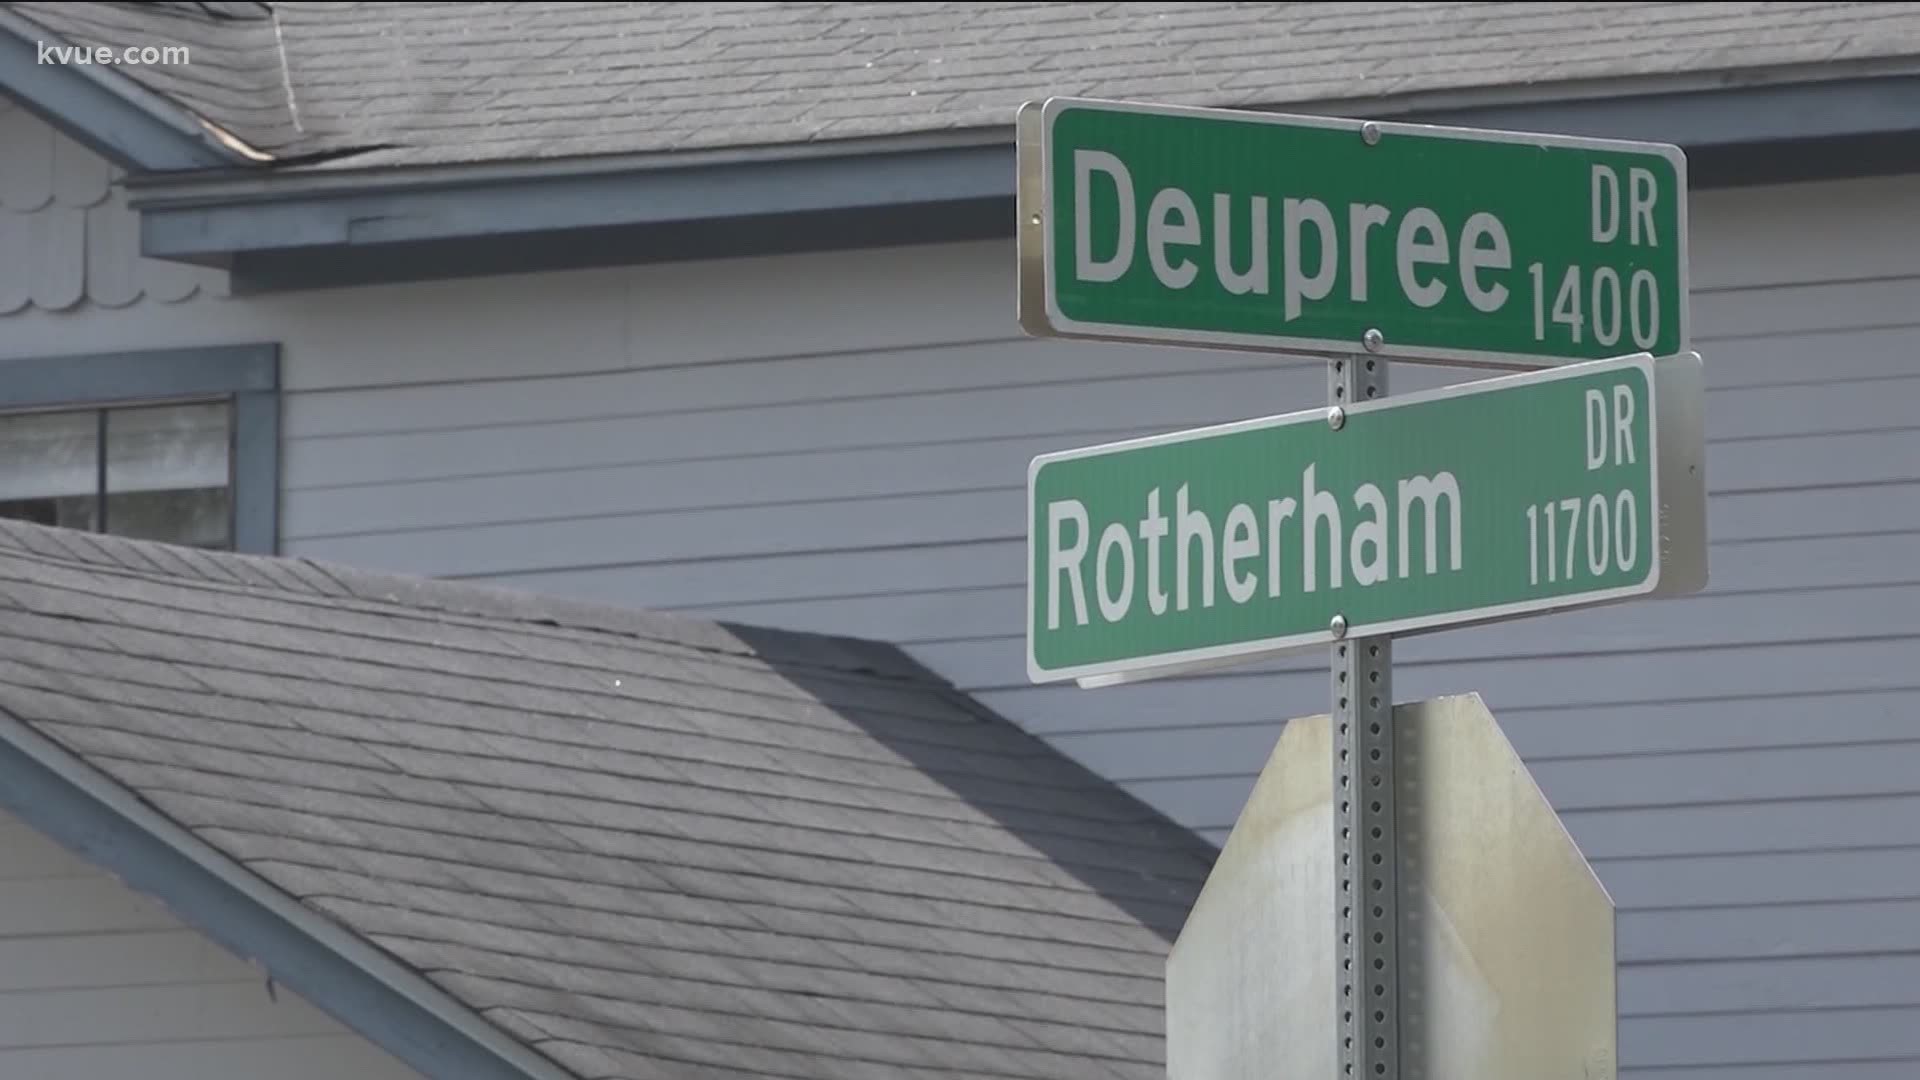 Tuesday morning, police got a call from someone who was walking on Rotherham Drive and heard a baby crying by the community mailboxes.